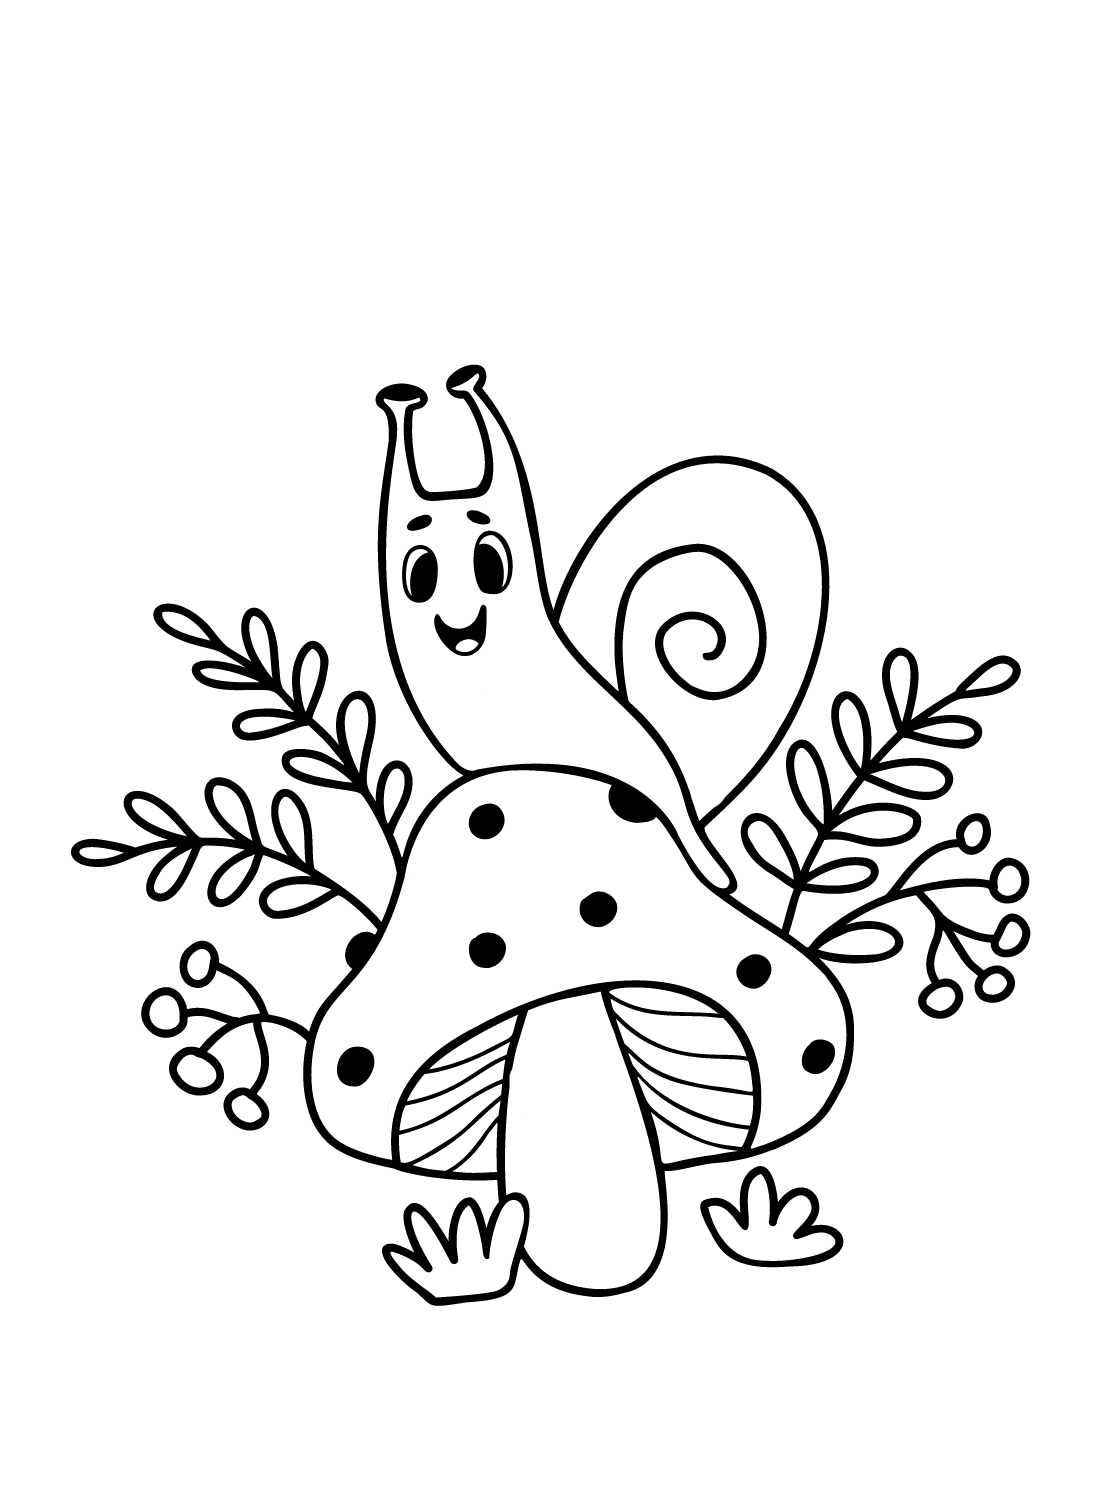 Snail on Mushroom Coloring Page - Free Printable Coloring Pages